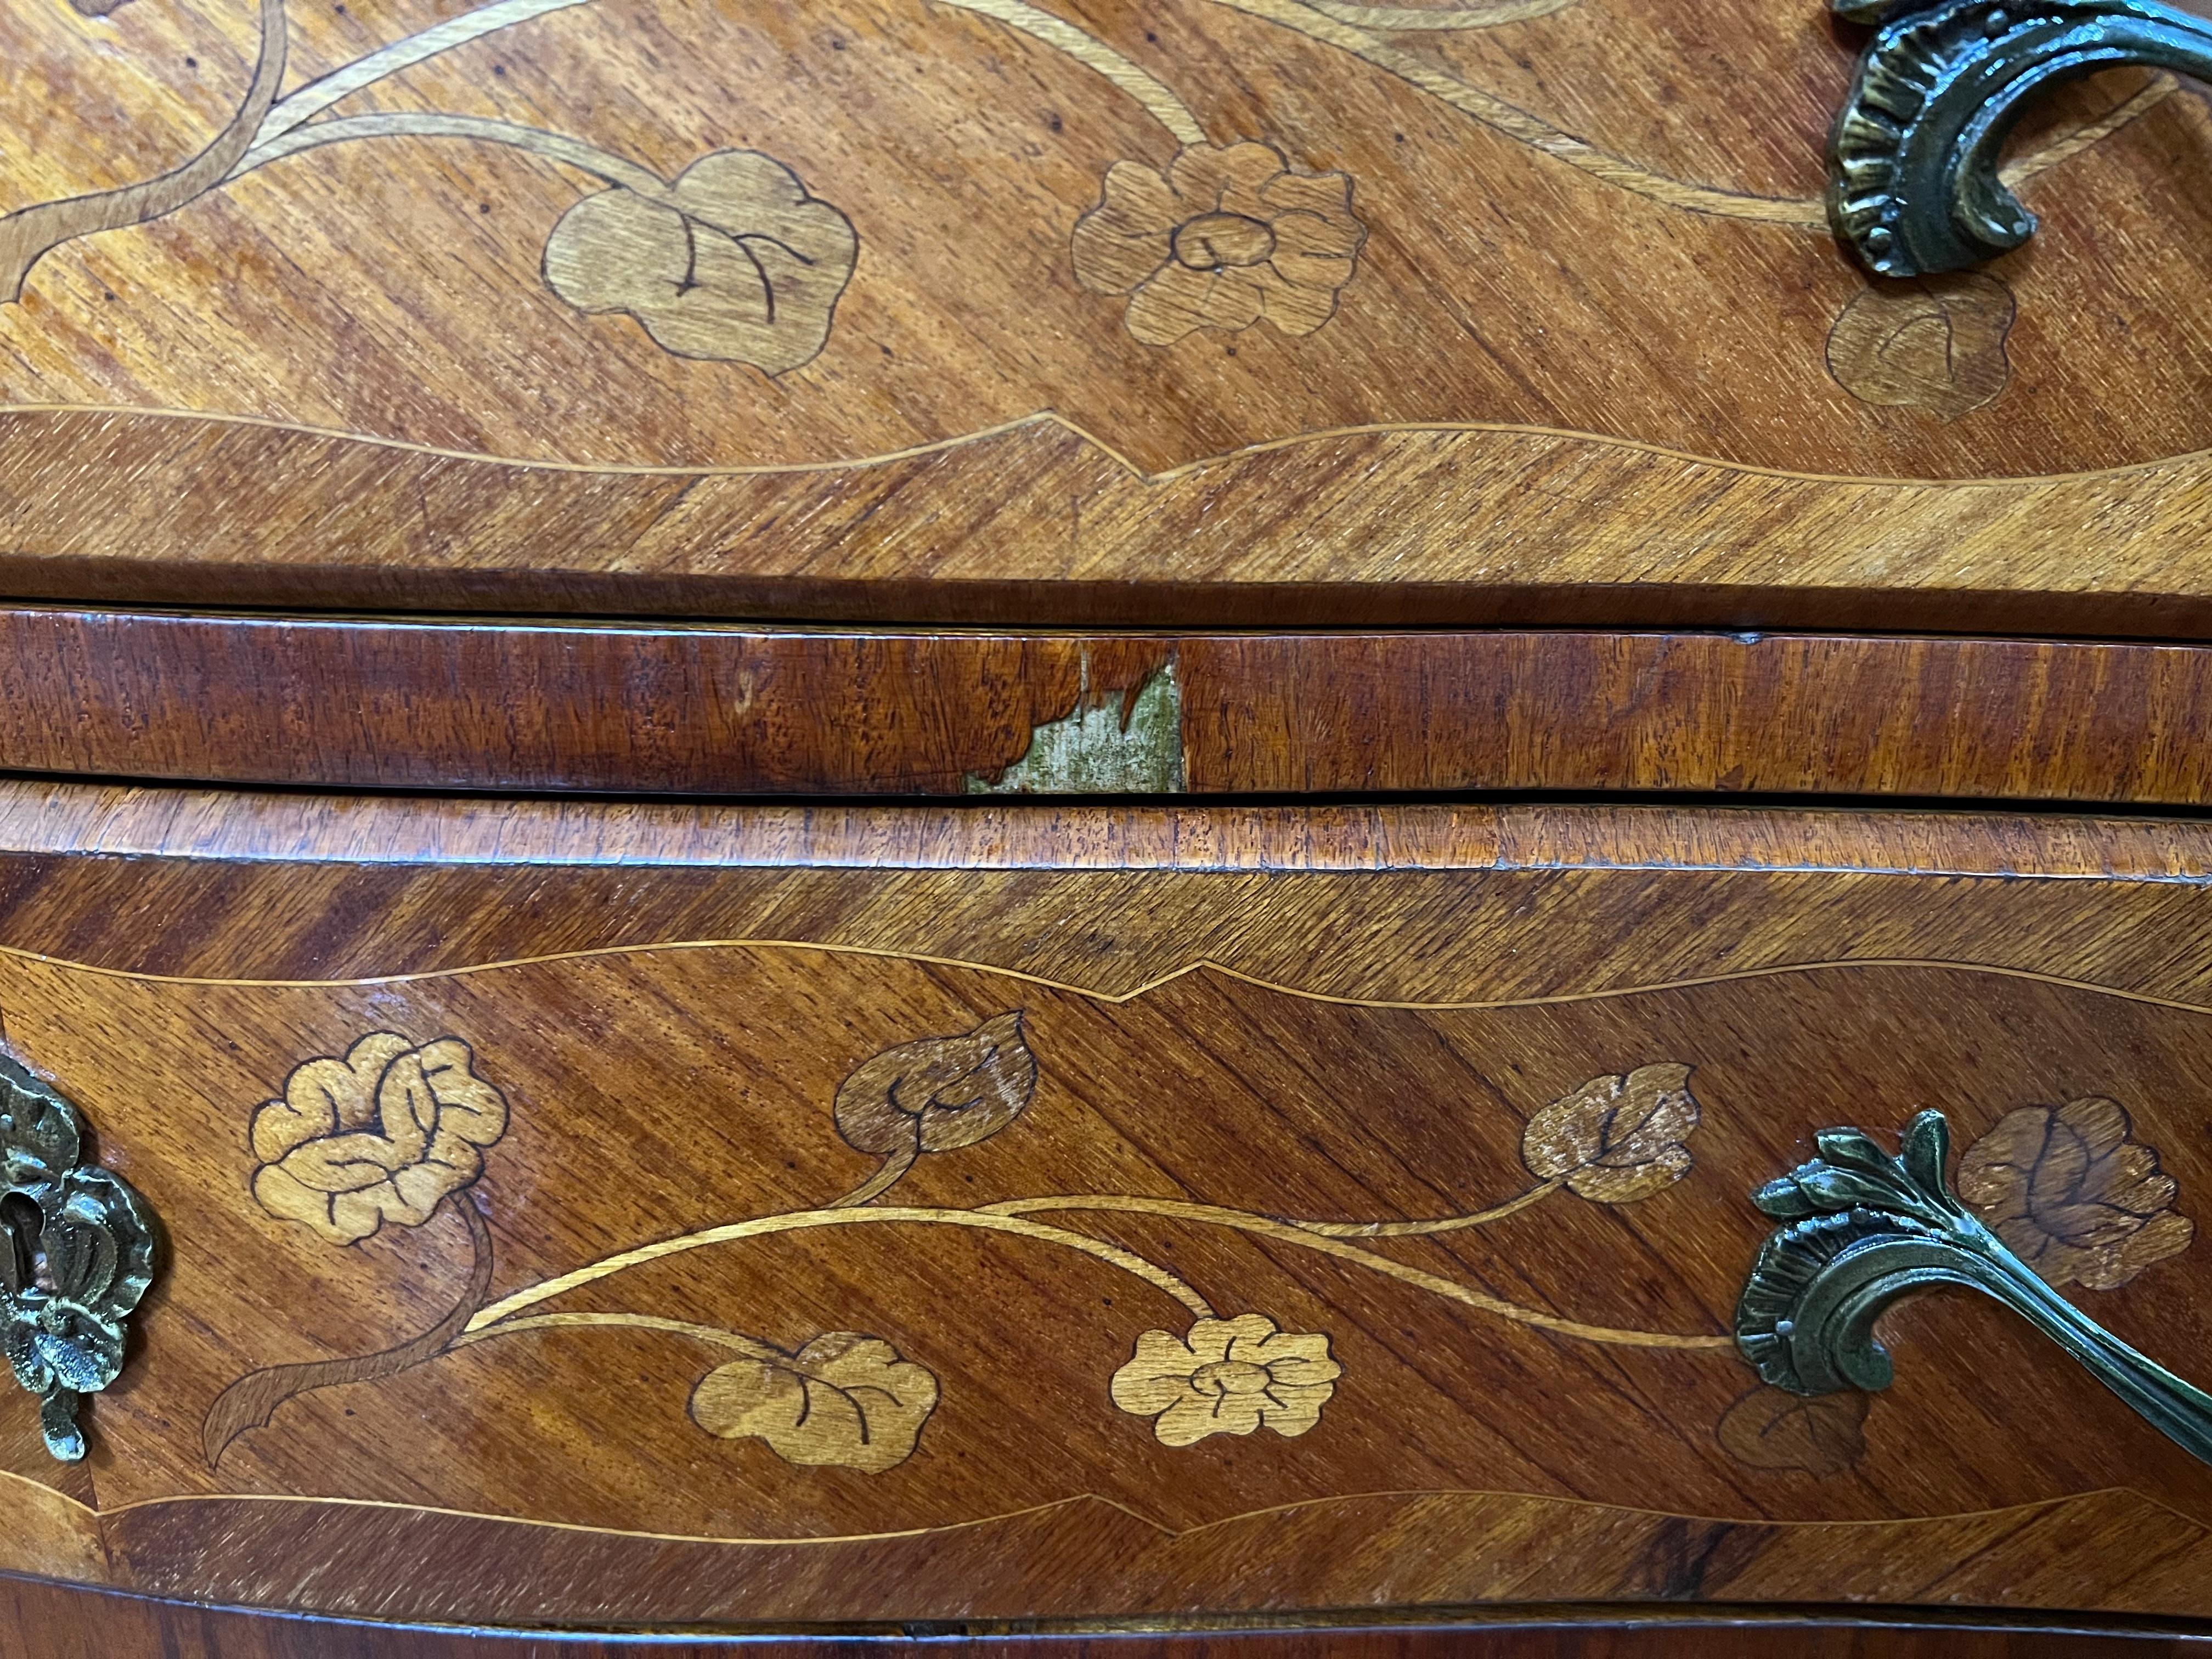 Walnut inlay design to both front and sides, three drawer space with beautiful detail brass handle pulls, brass detail to legs, curved marble top. There are some wear to the front of the item and one side on the drawers, please see photos.